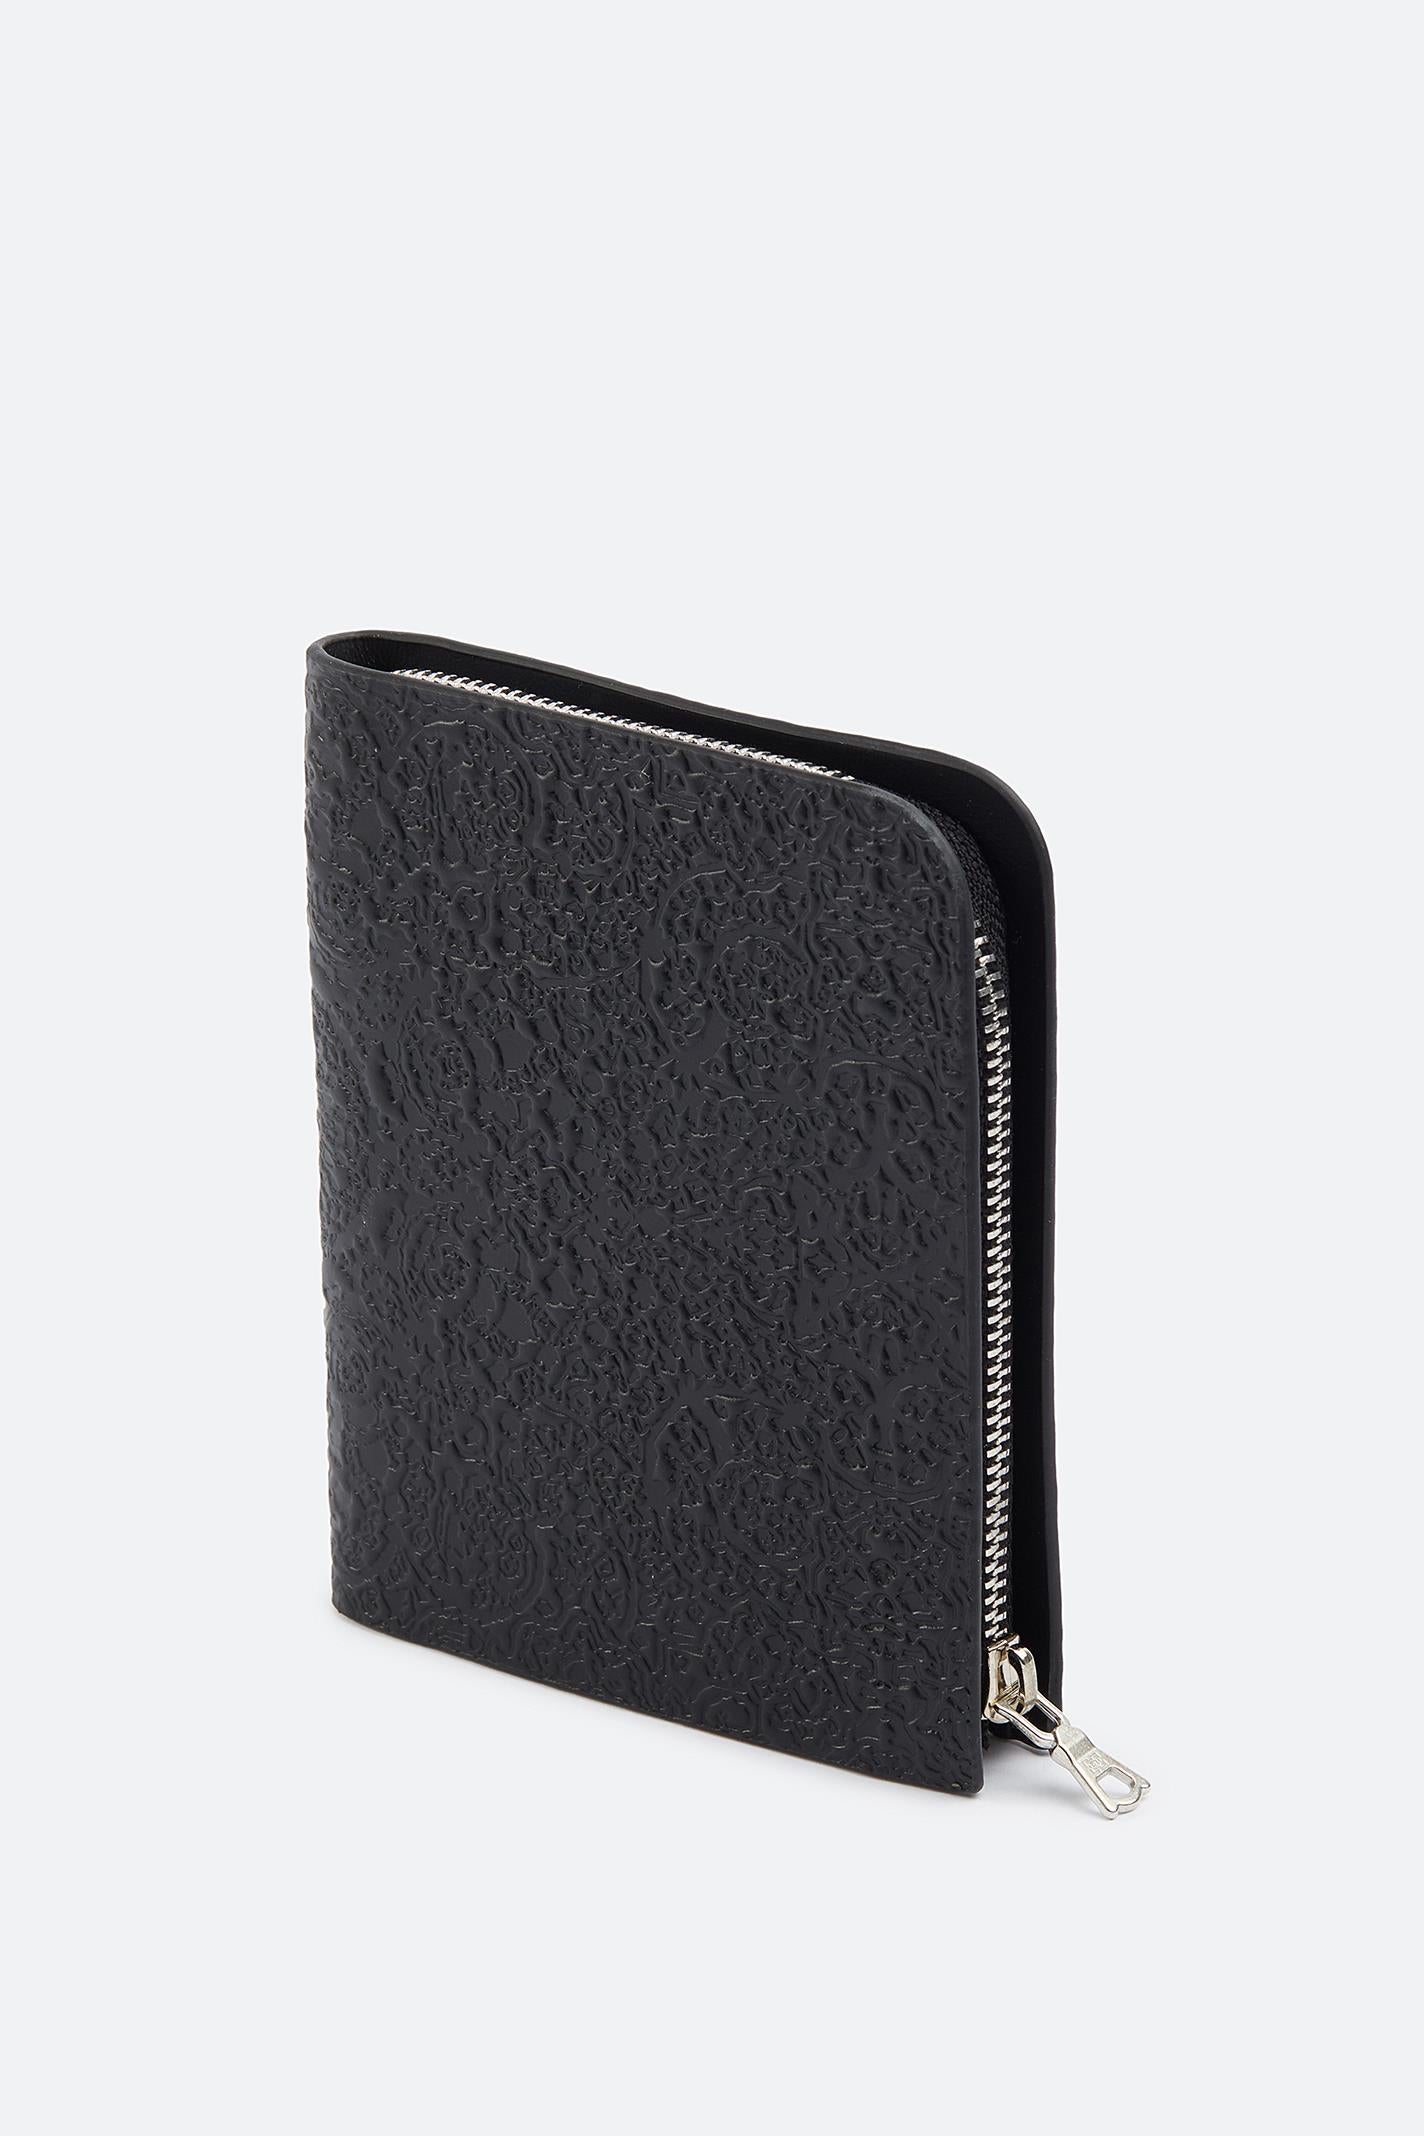  LARGE ZIPPED WALLET 012